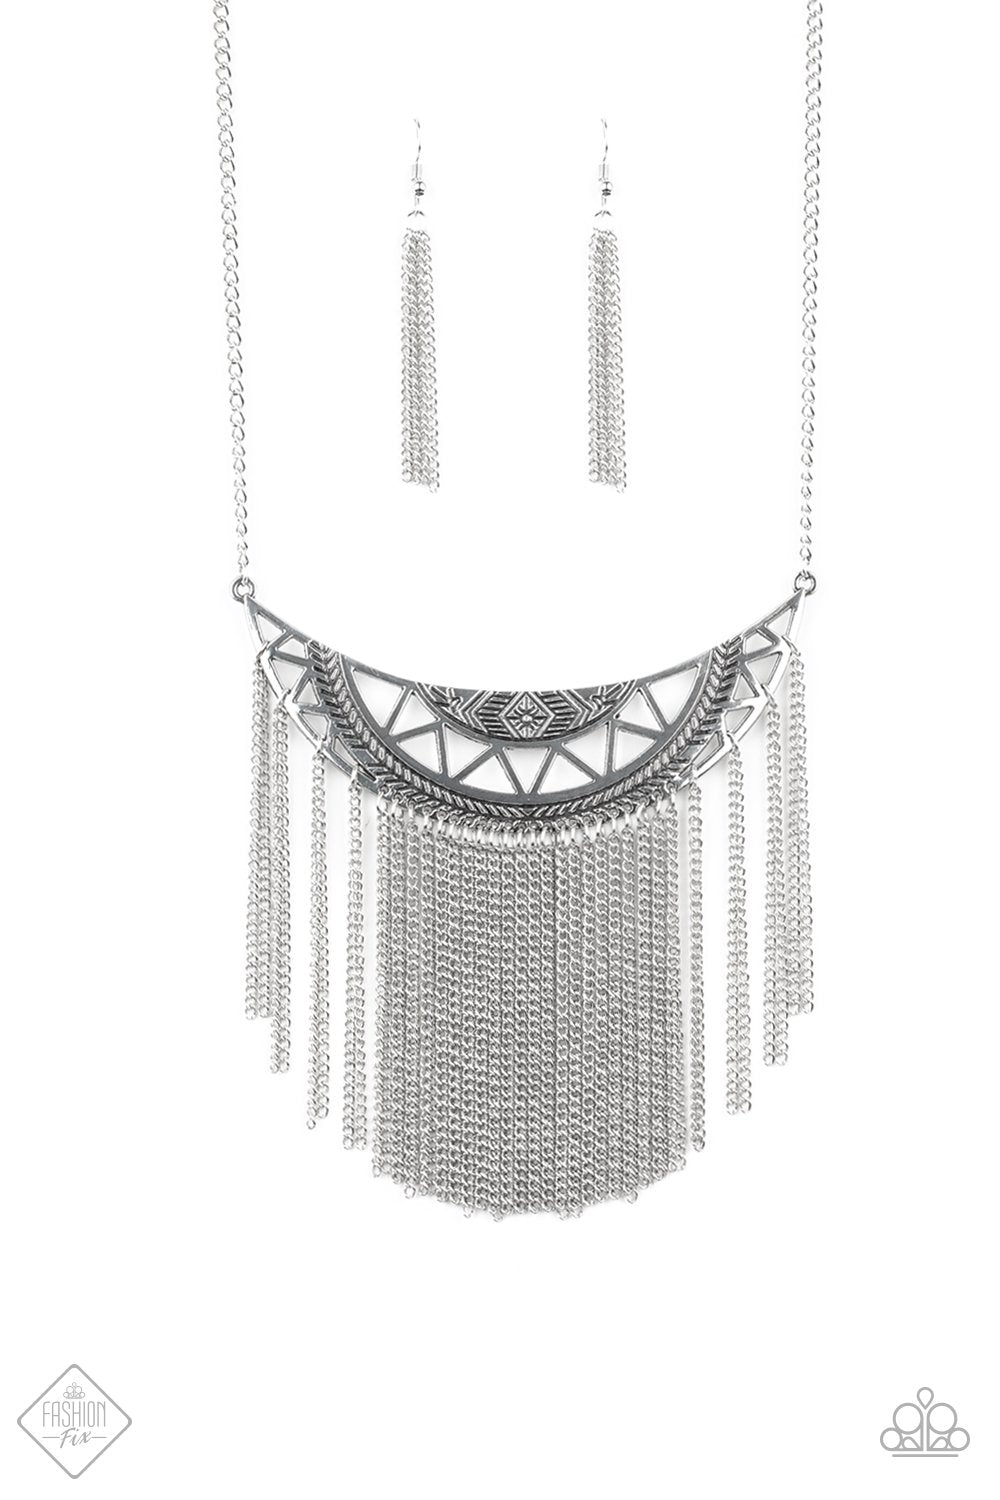 Empress Excursion Necklace - Paparazzi Jewelry - Bejeweled Accessories By Kristie - A stenciled silver crescent stamped in tribal inspired patterns swings unapologetically below the collar. A curtain of shimmery silver chains cascades from the bottom of the dramatic pendant, creating a bold fringe with endless movement. Features an adjustable clasp closure. Sold as one individual necklace.